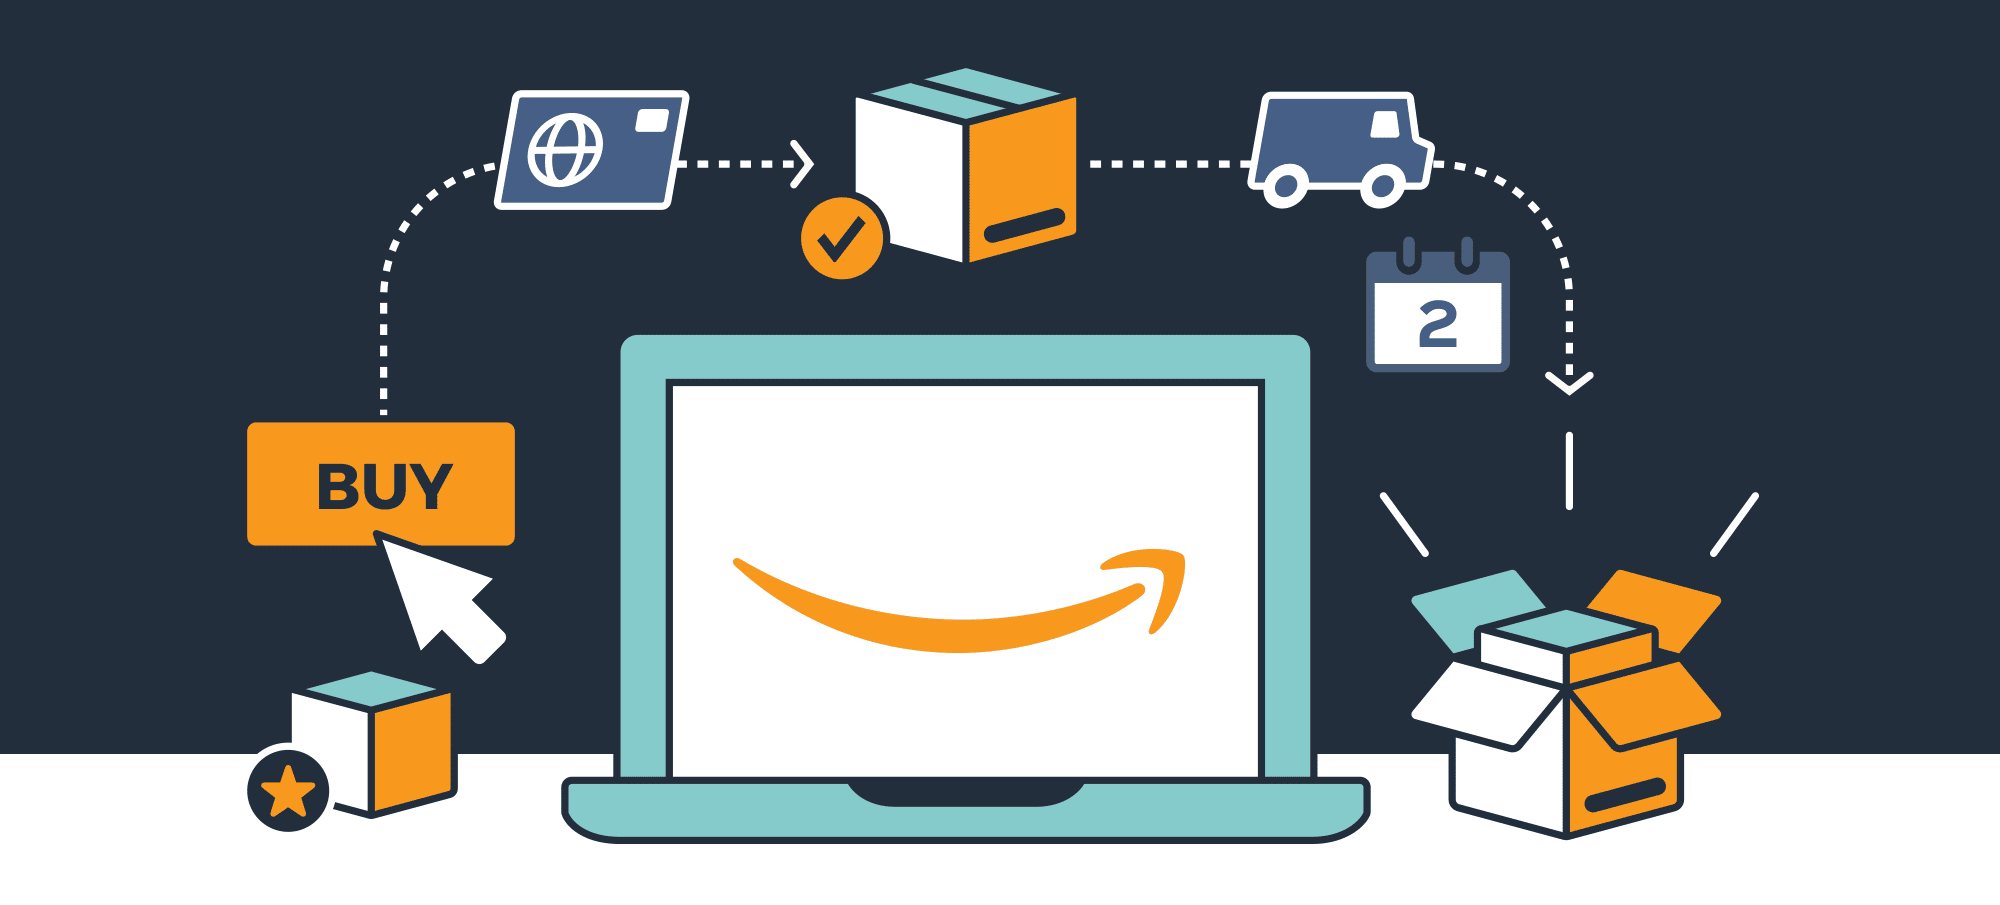 How-To-Sell-On-Amazon-Without-Inventory